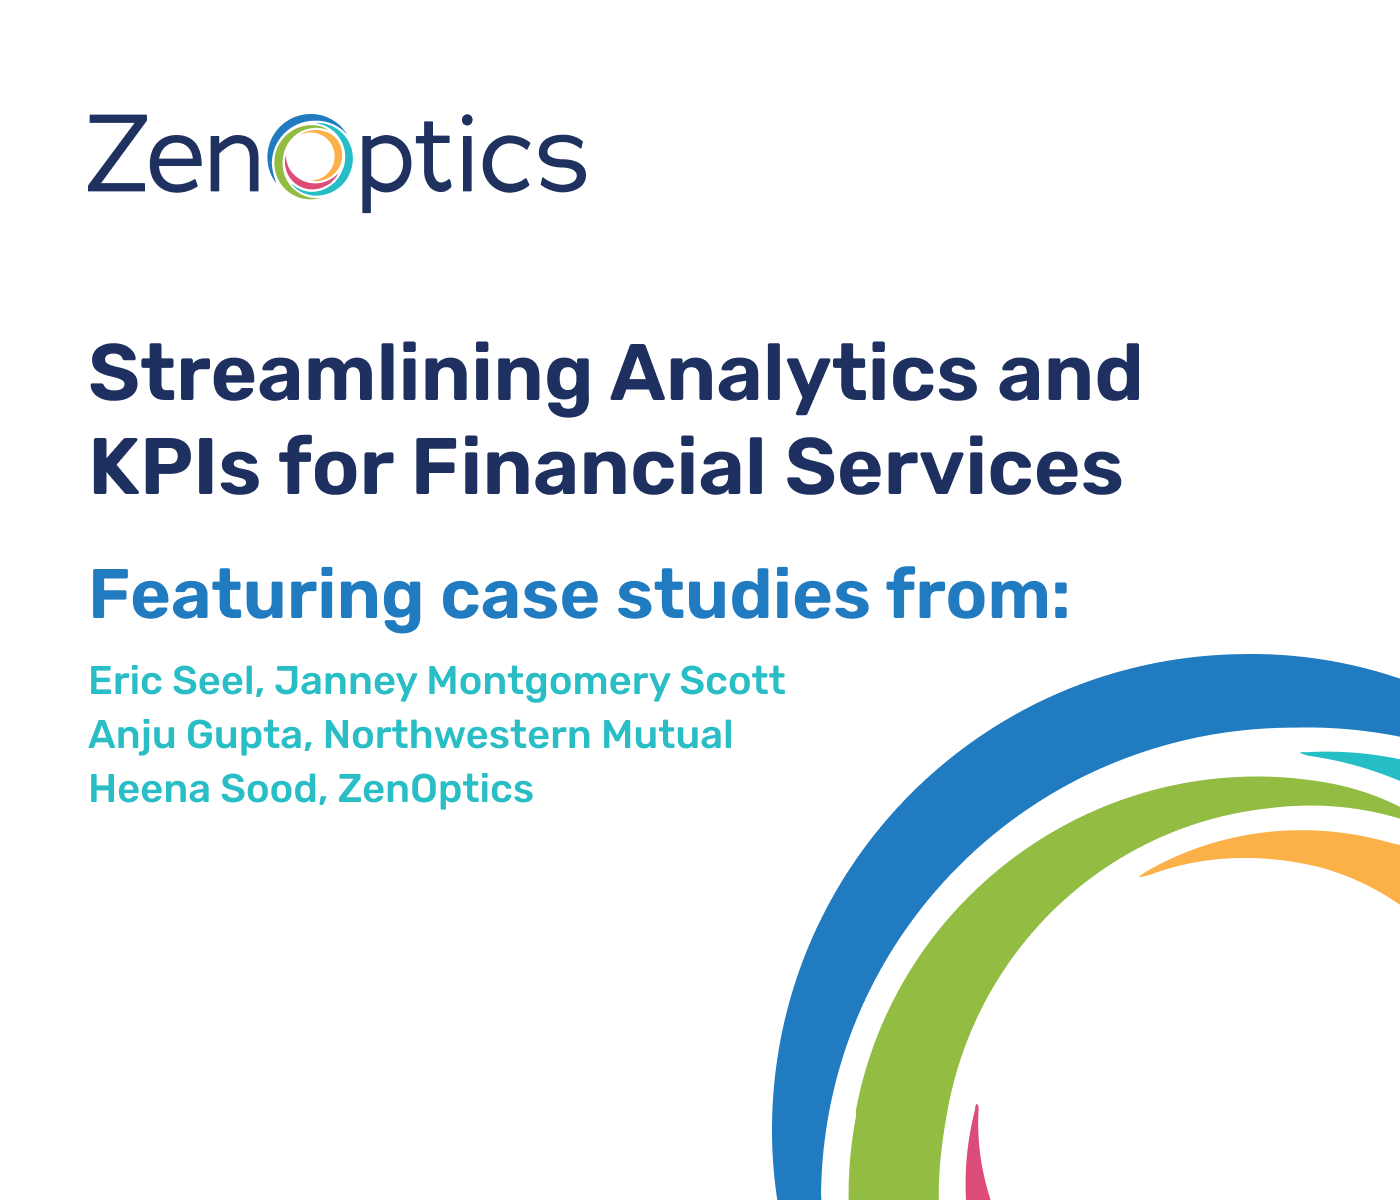 Streamlining Analytics and KPIs for Financial Services (1)